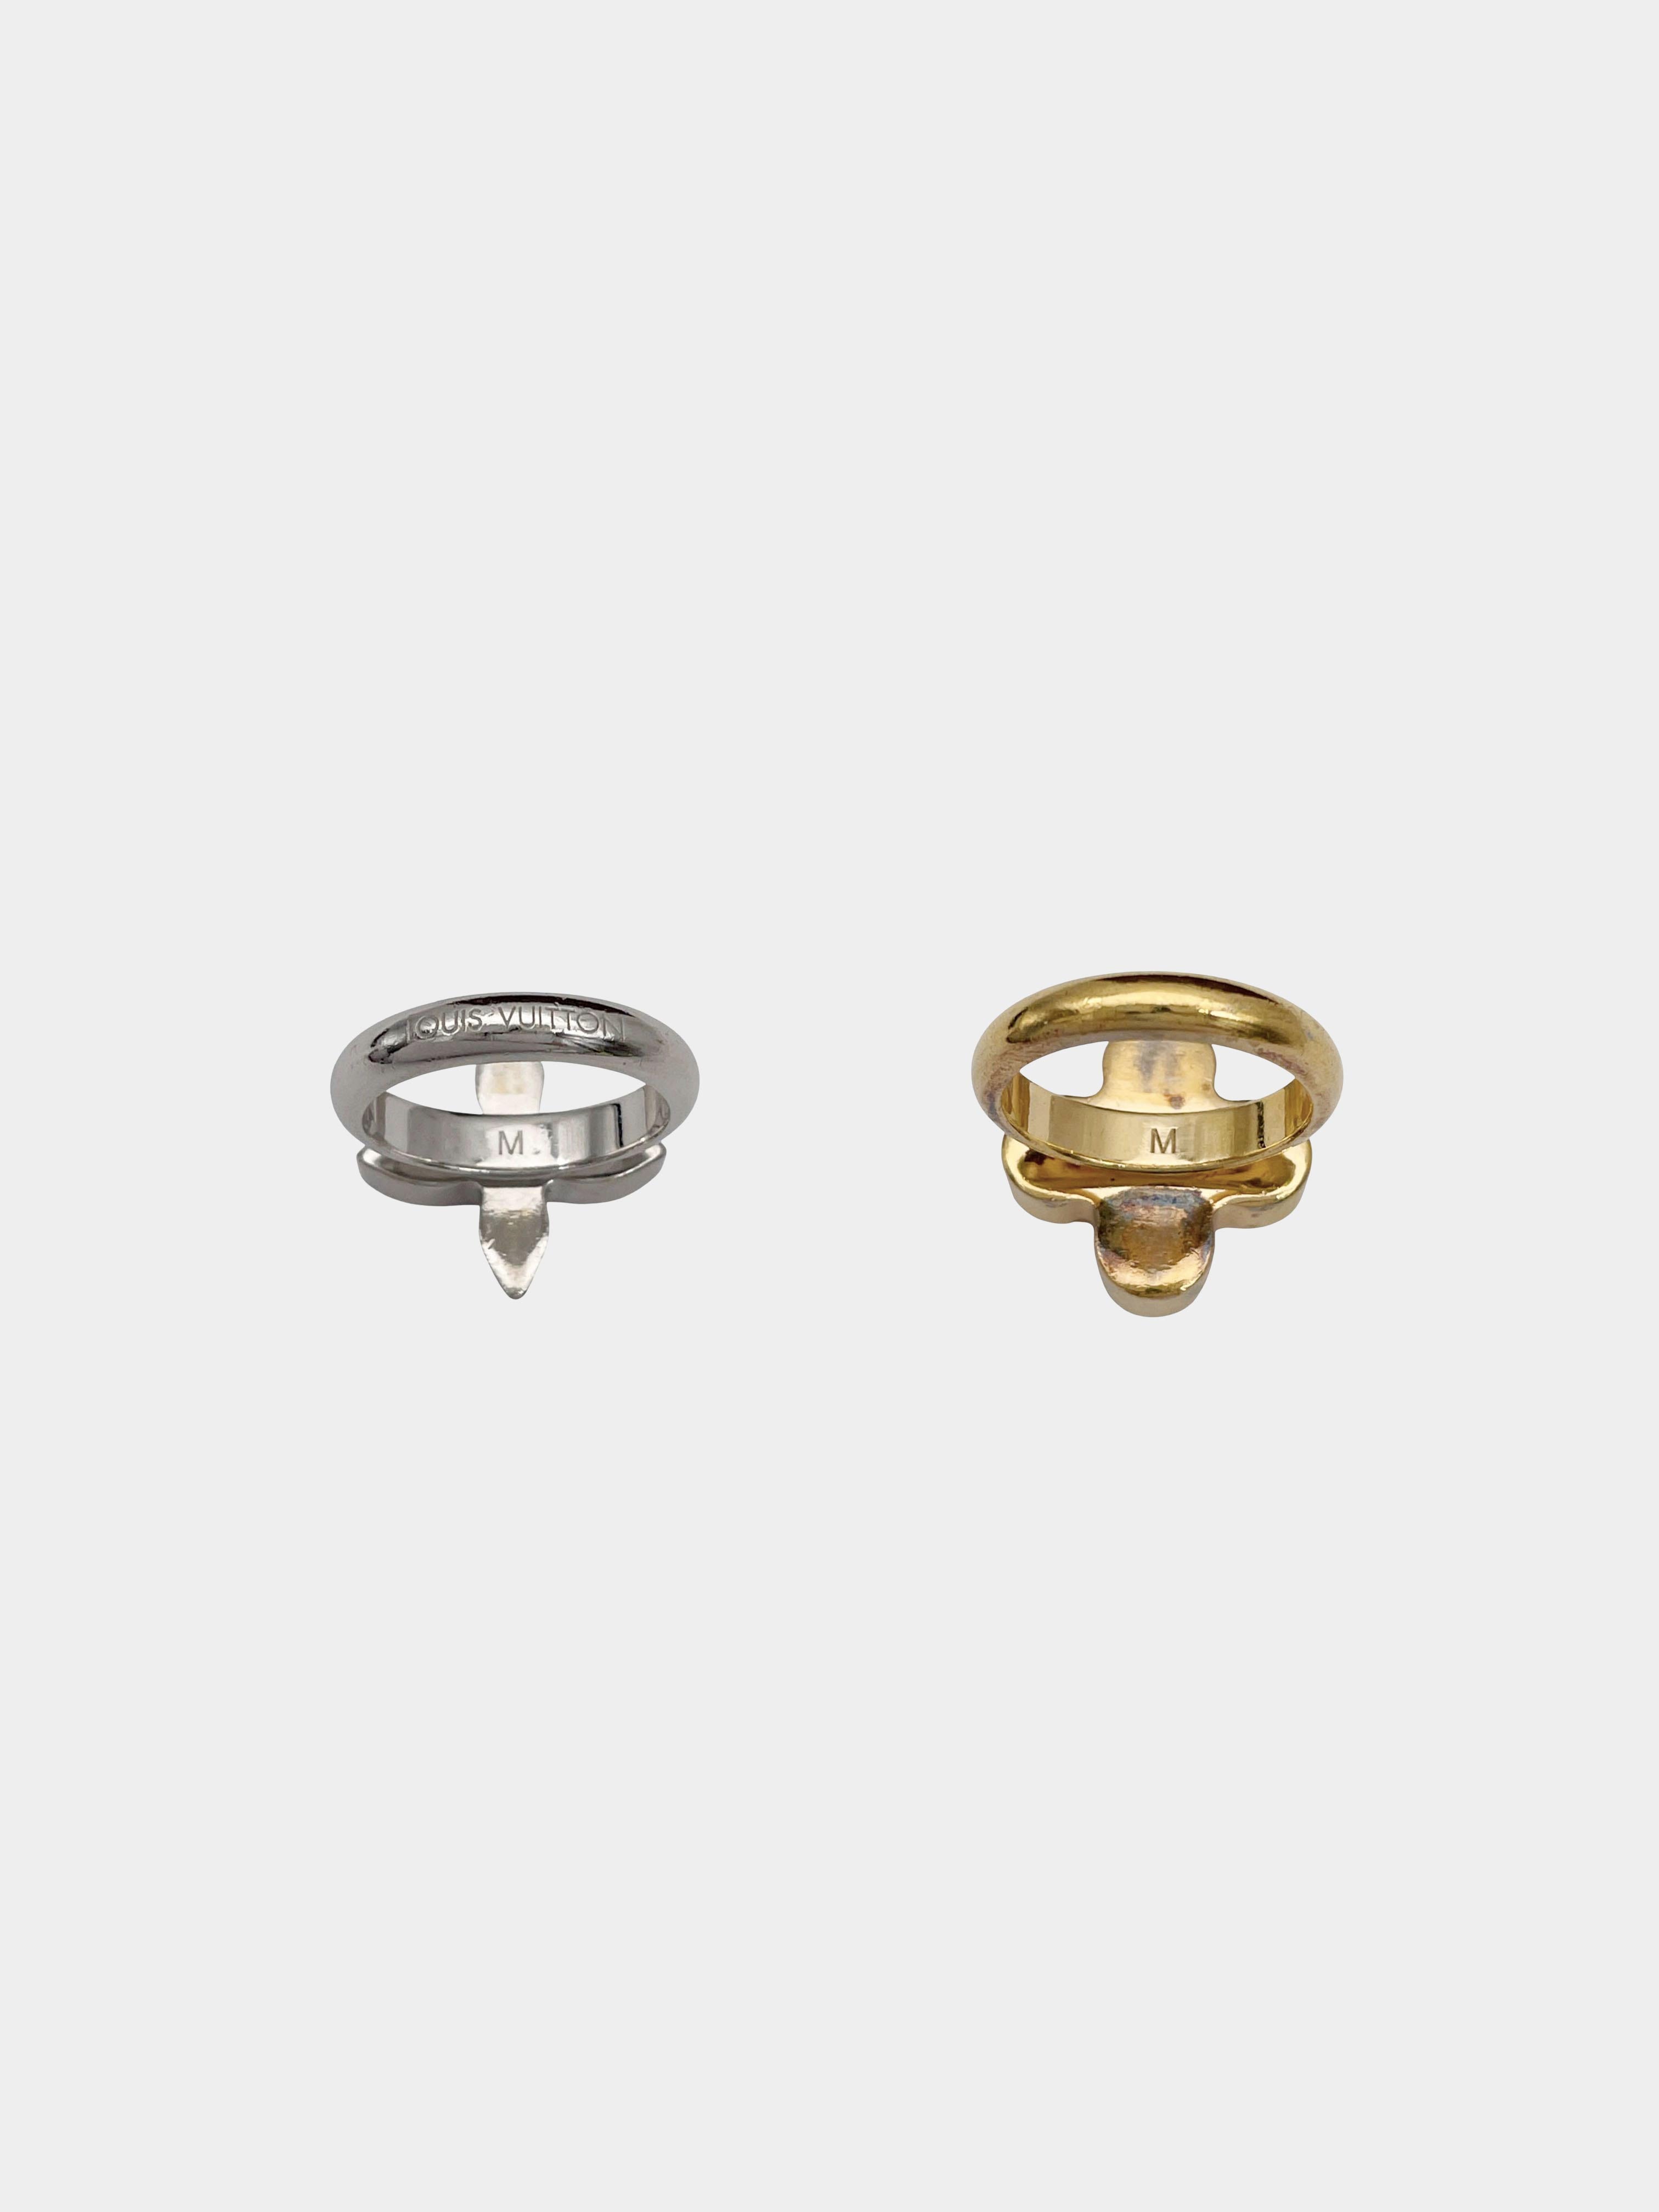 Louis Vuitton 2010 Gold and Silver Love Letters Ring Set